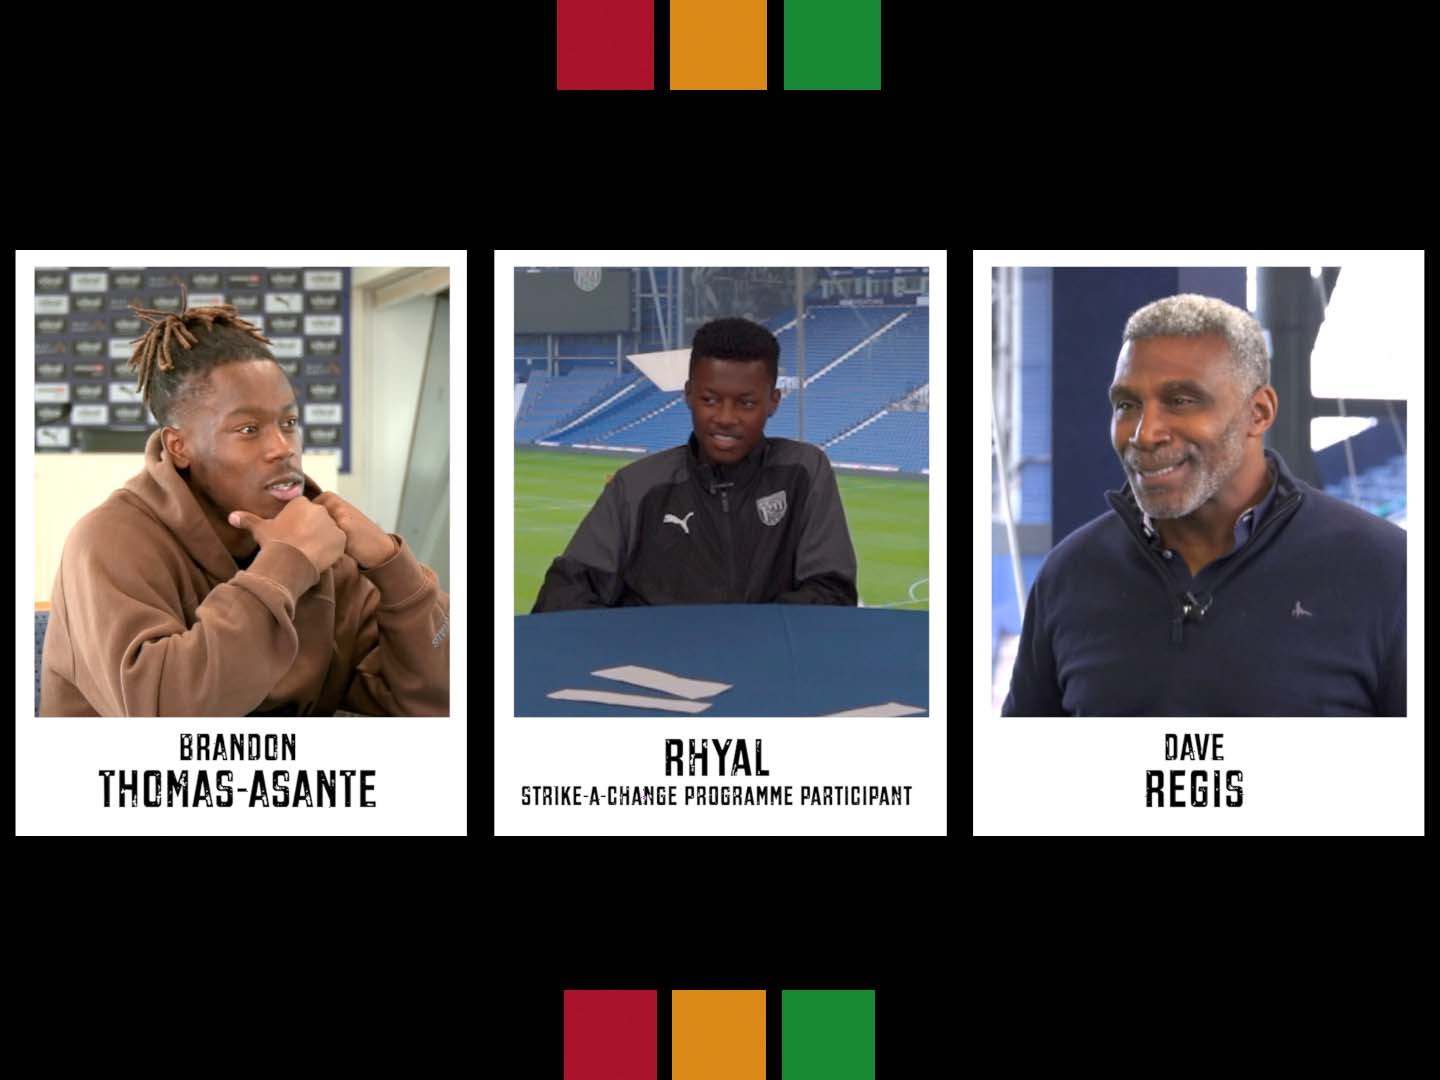 Brandon Thomas-Asante, Dave Regis and Rhyal sit down to discuss issues and topics around race at The Hawthorns.